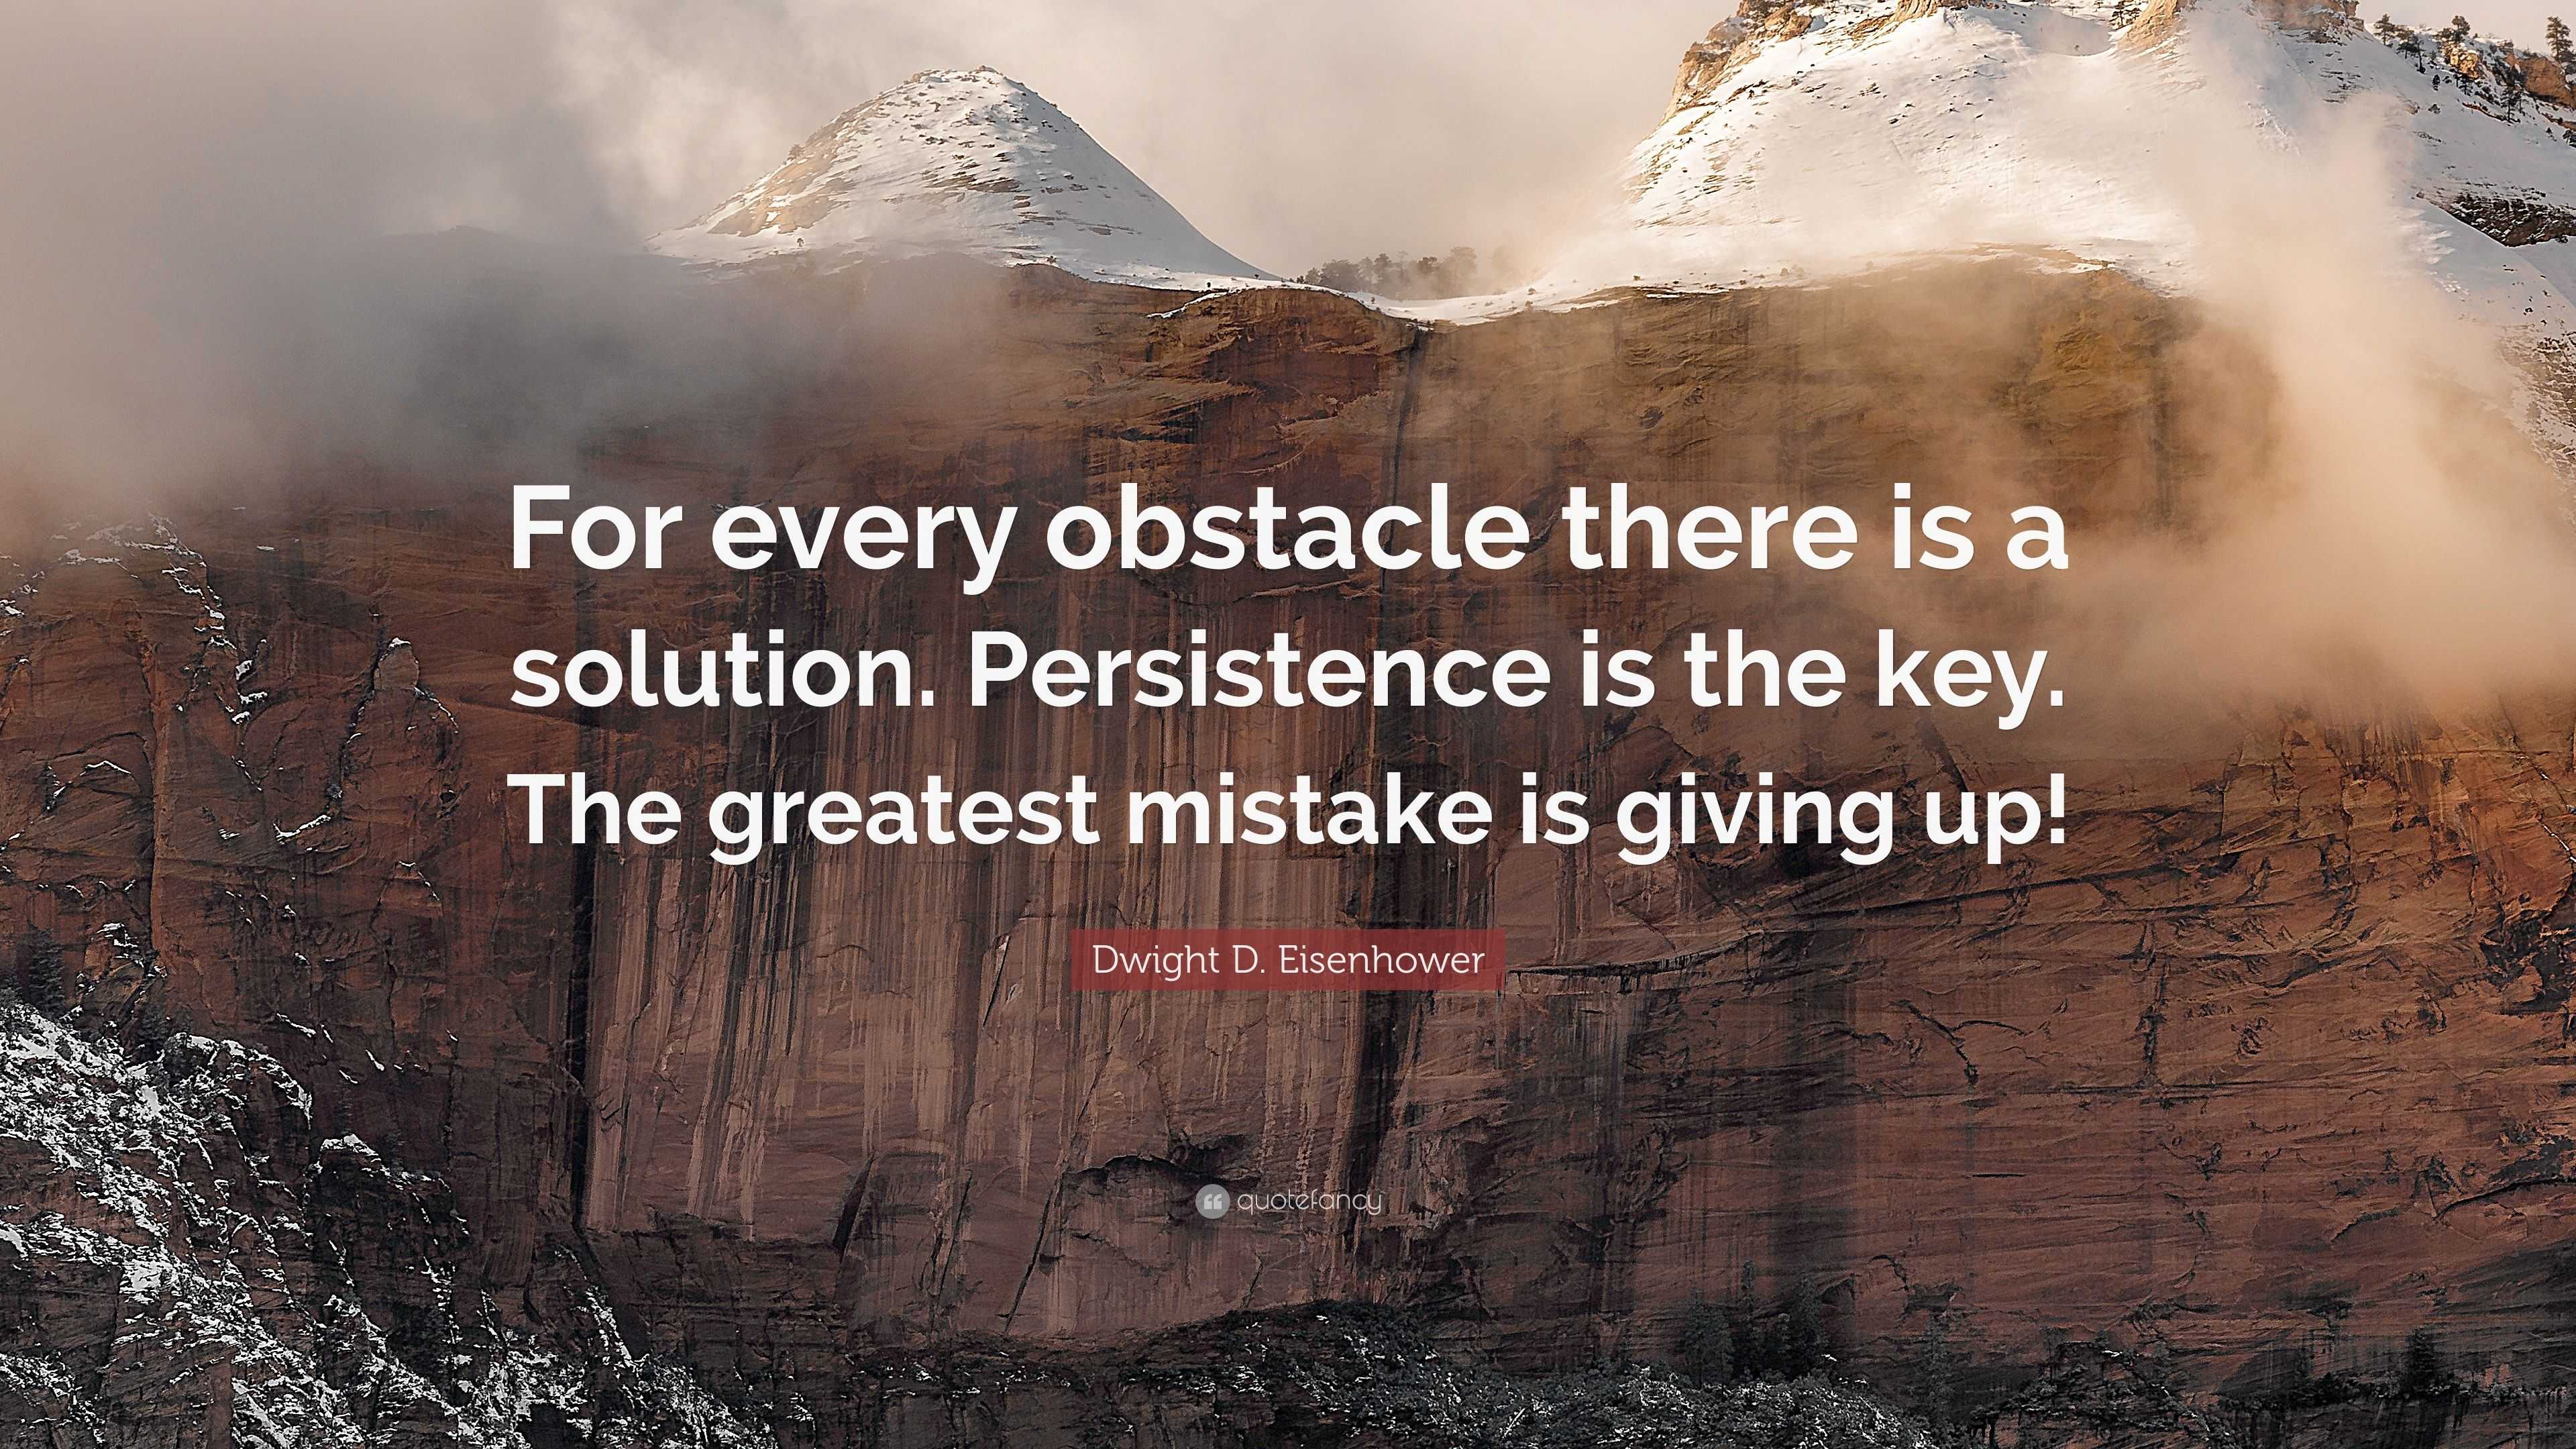 Dwight D. Eisenhower Quote: “For every obstacle there is a solution ...